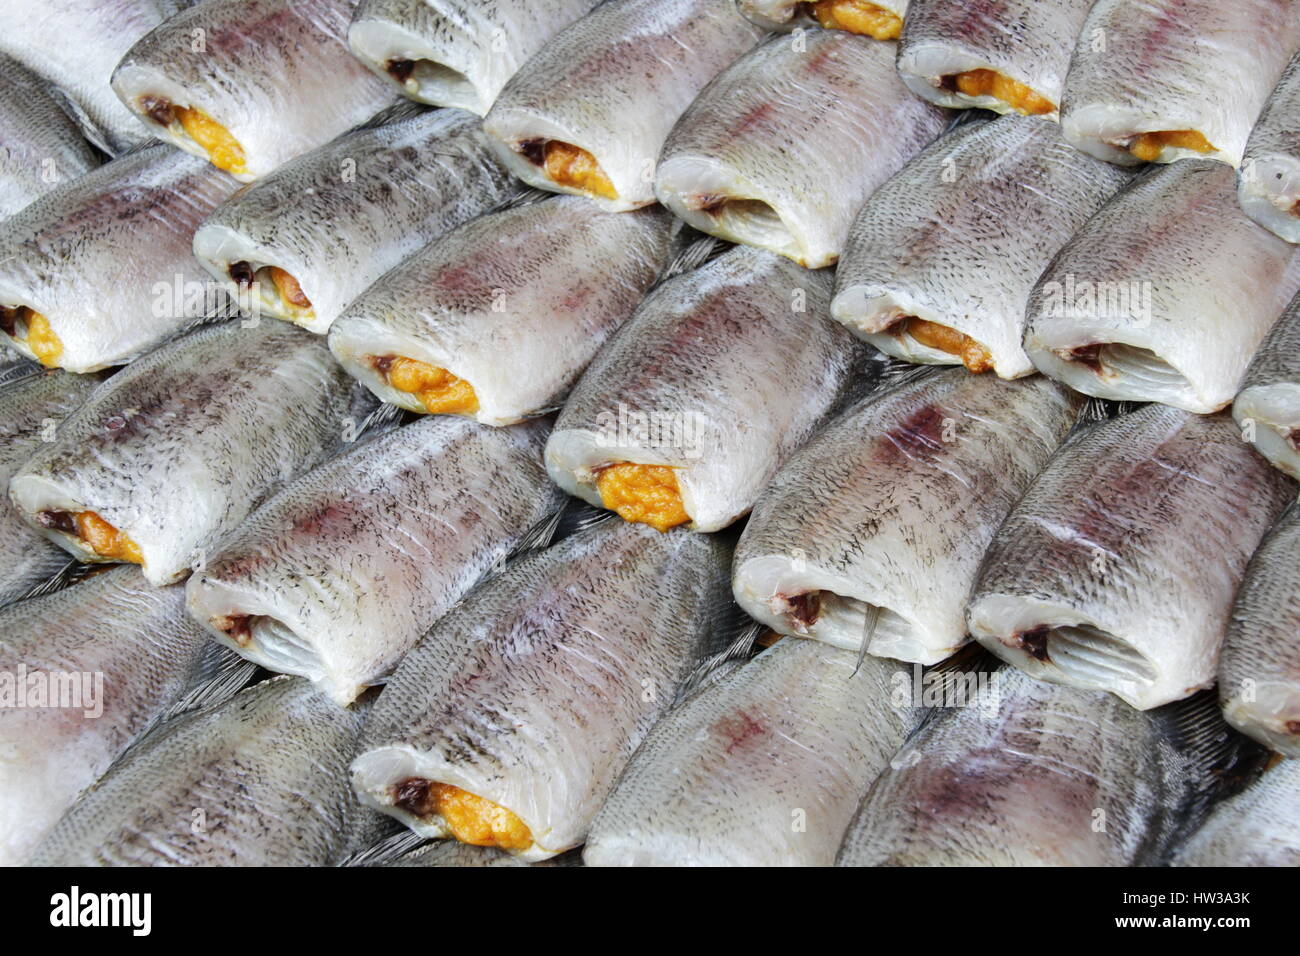 Thai Dried Salted Fish Making - Snakeskin gourami in the Food Market in Thailand Stock Photo